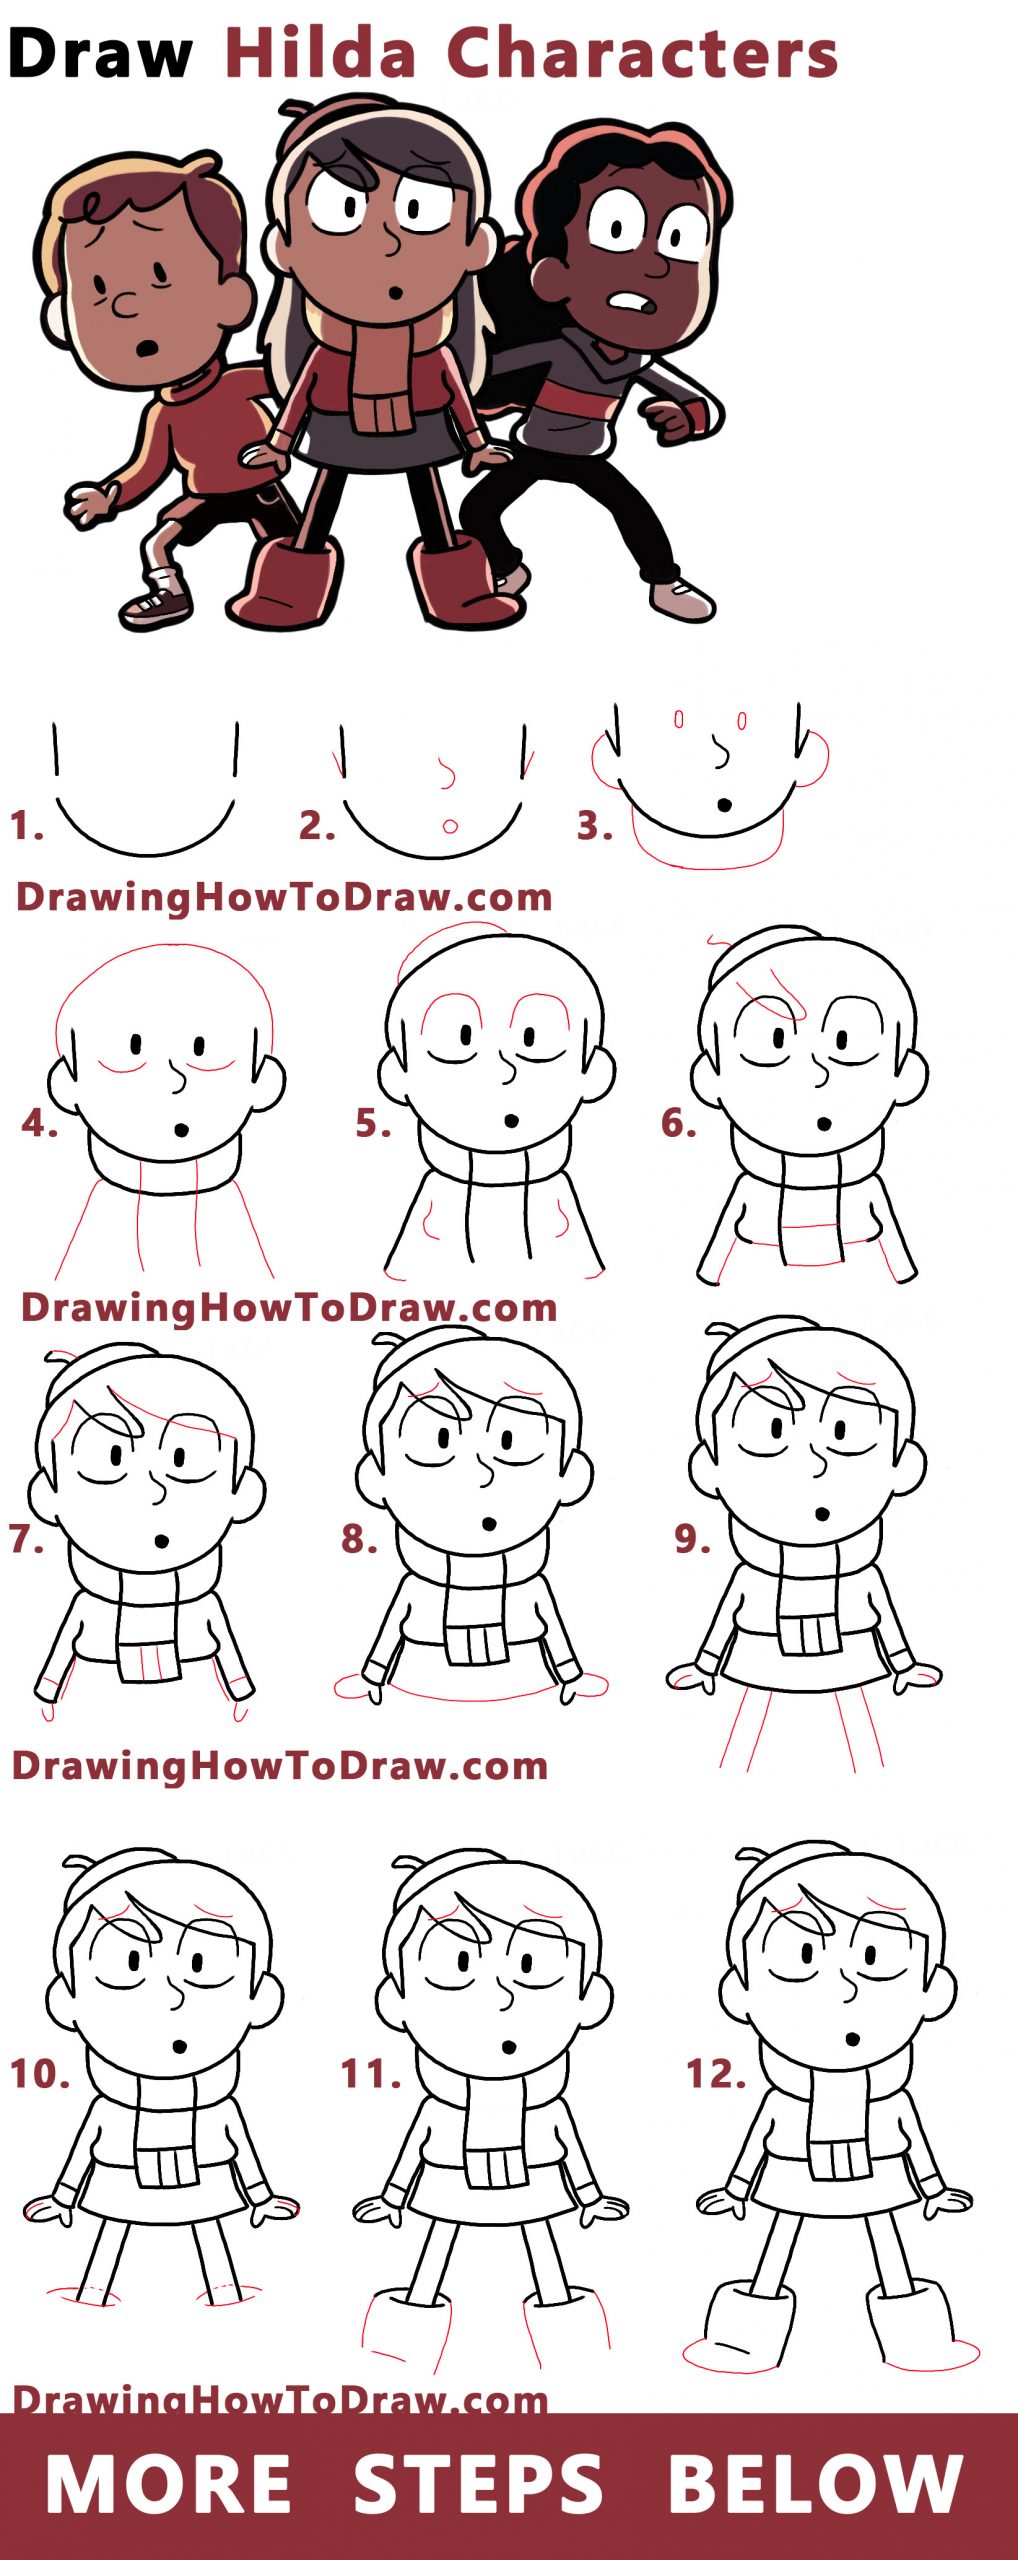 Learn How to Draw Hilda Characters (Hilda, David, and Frida) Easy Step by Step Drawing Tutorial for Kids